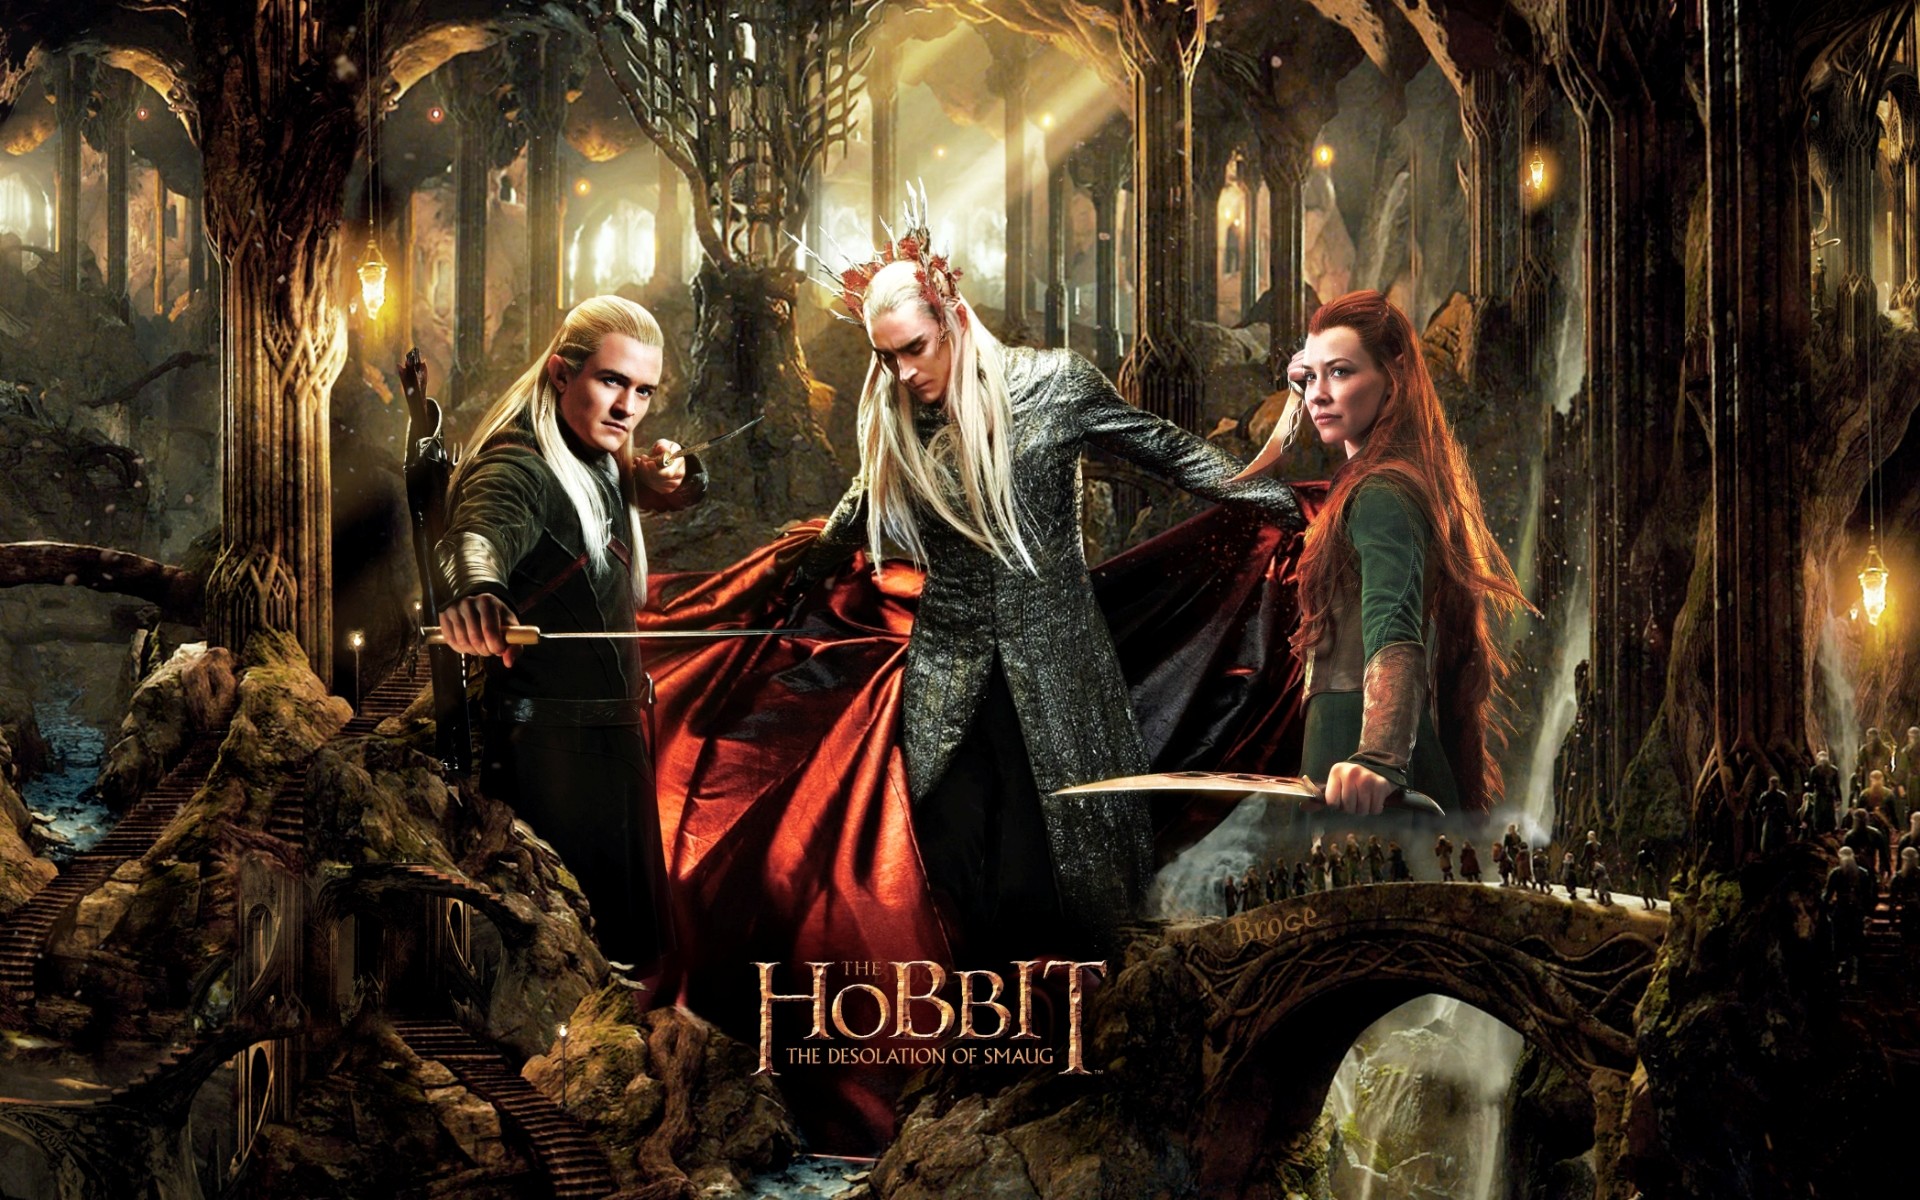 The Hobbit, Movies, Legolas, Evangeline Lilly, Orlando Bloom, Tauriel, The Hobbit: The Desolation Of Smaug, Lee Pace, Thranduil, Elves Wallpaper